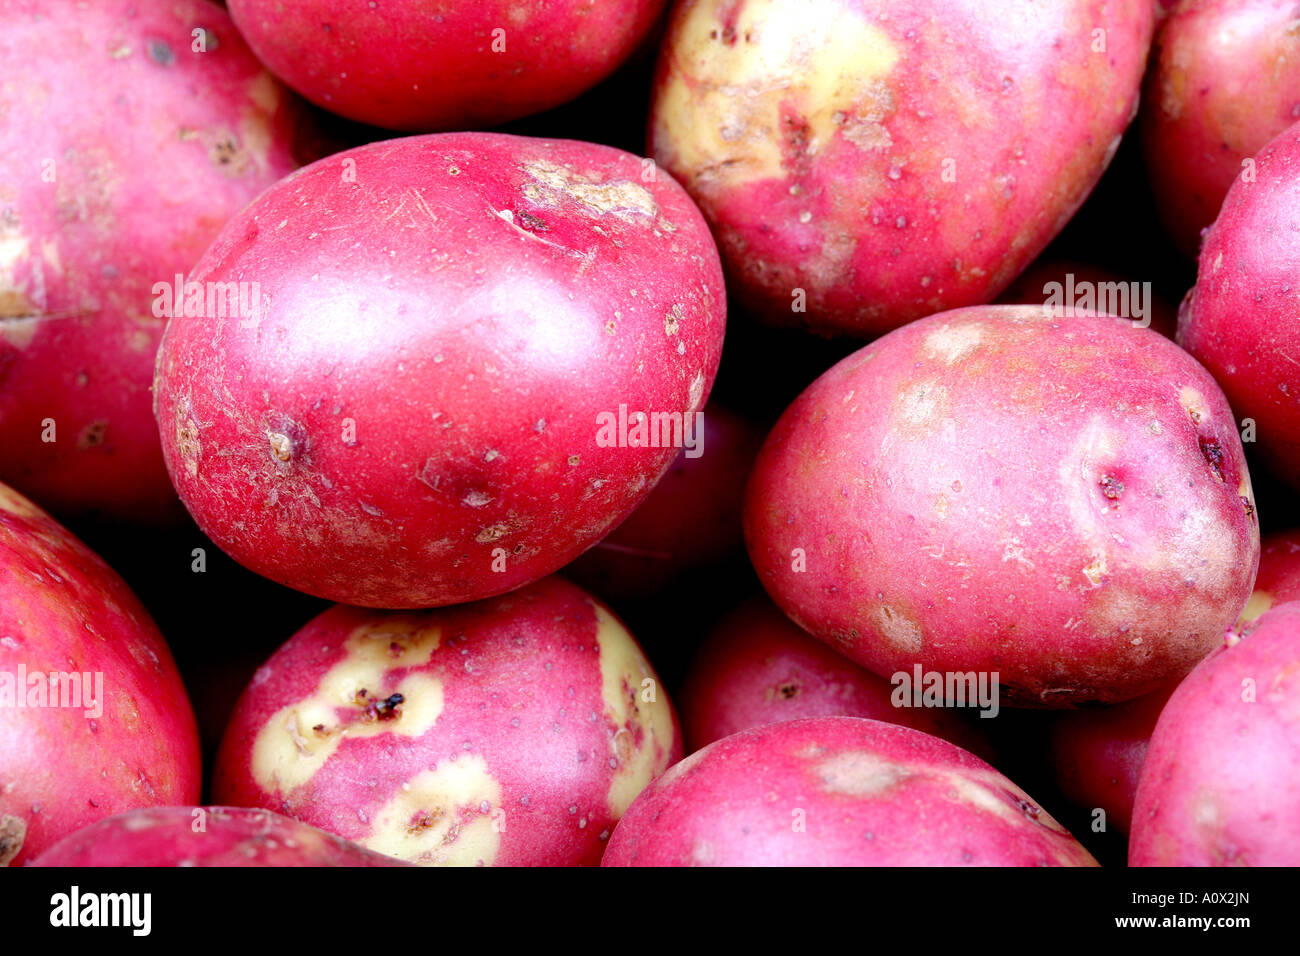 Fresh Cleaned Uncooked Red Potatoes With No People Stock Photo